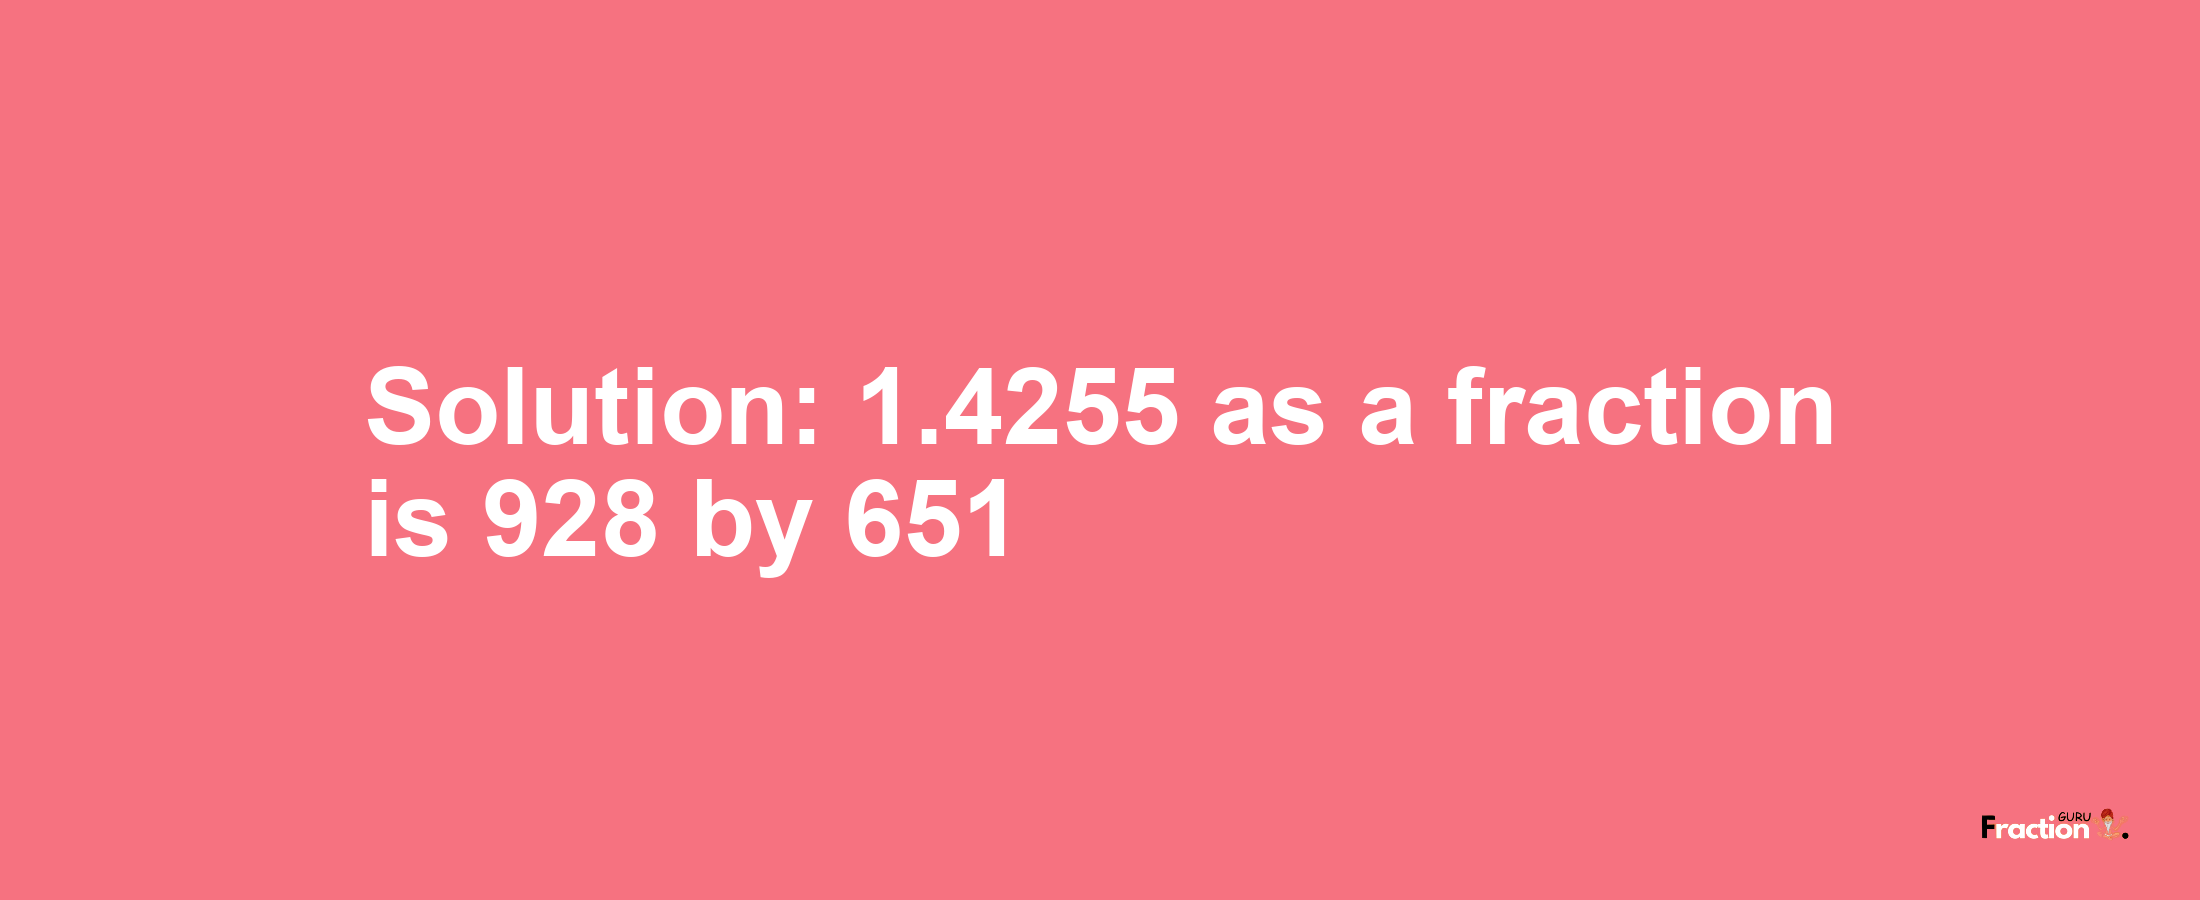 Solution:1.4255 as a fraction is 928/651